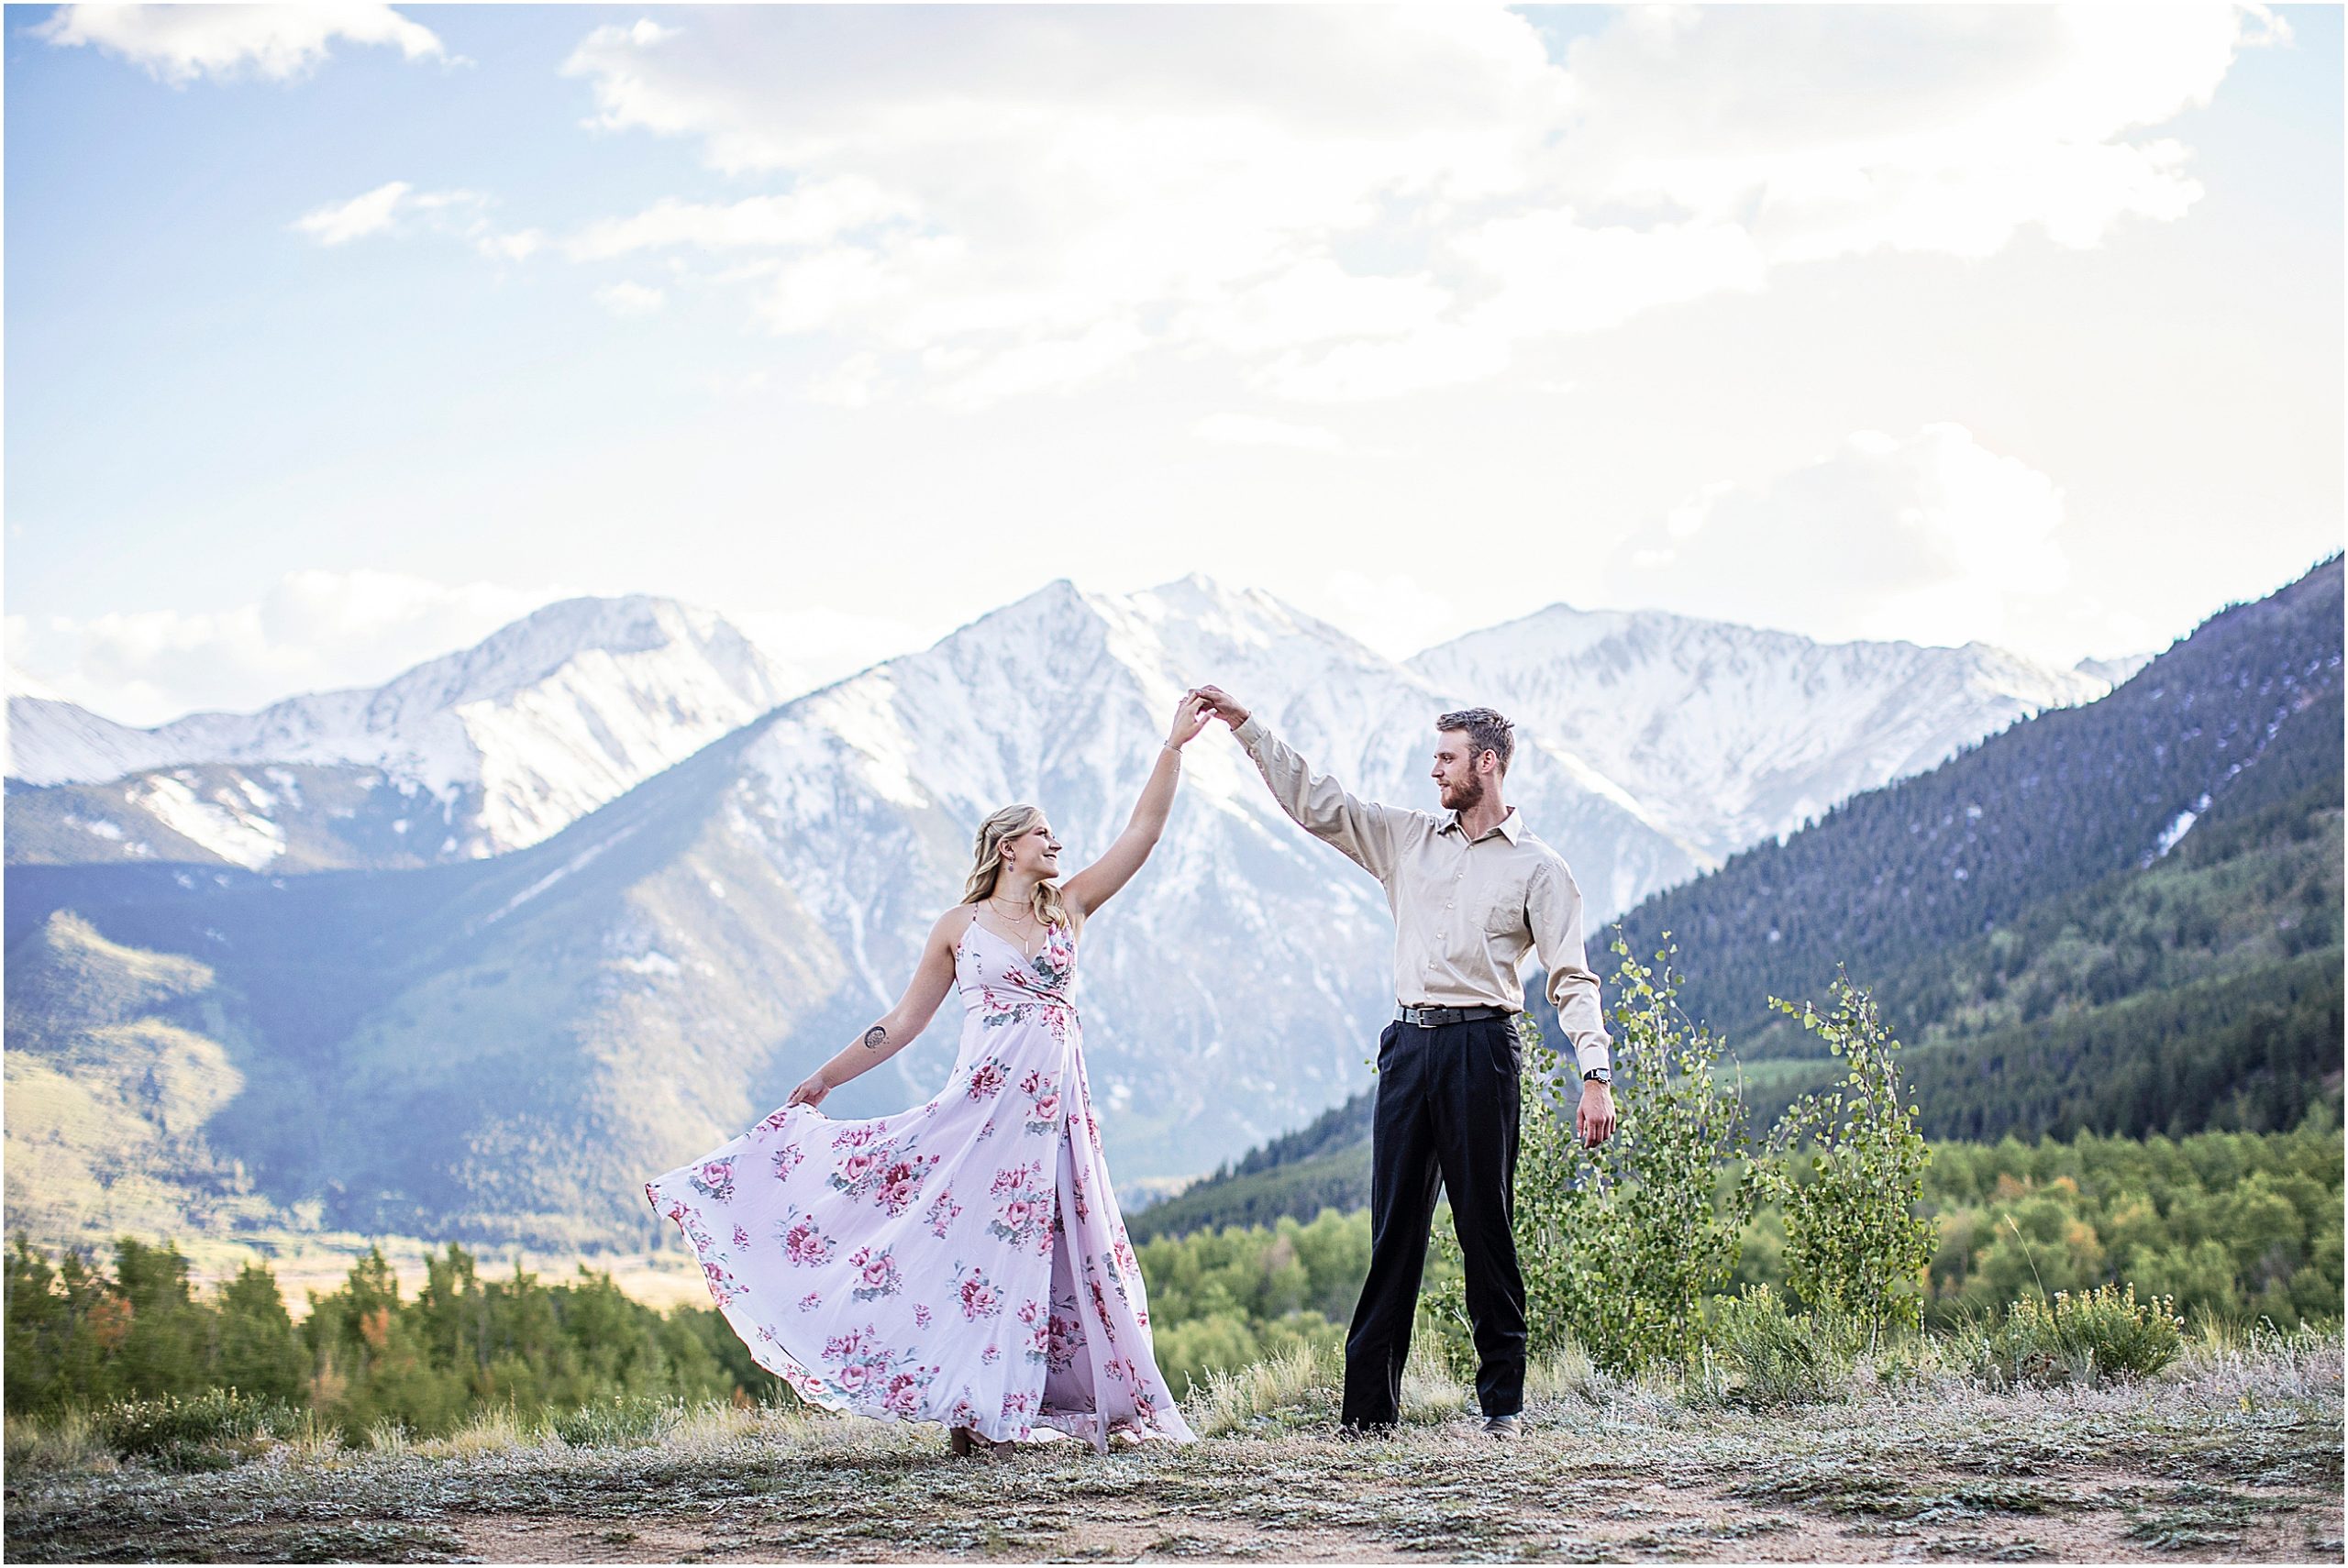 Nate and Darla dance on a mountain top in Colorado during their engagement session